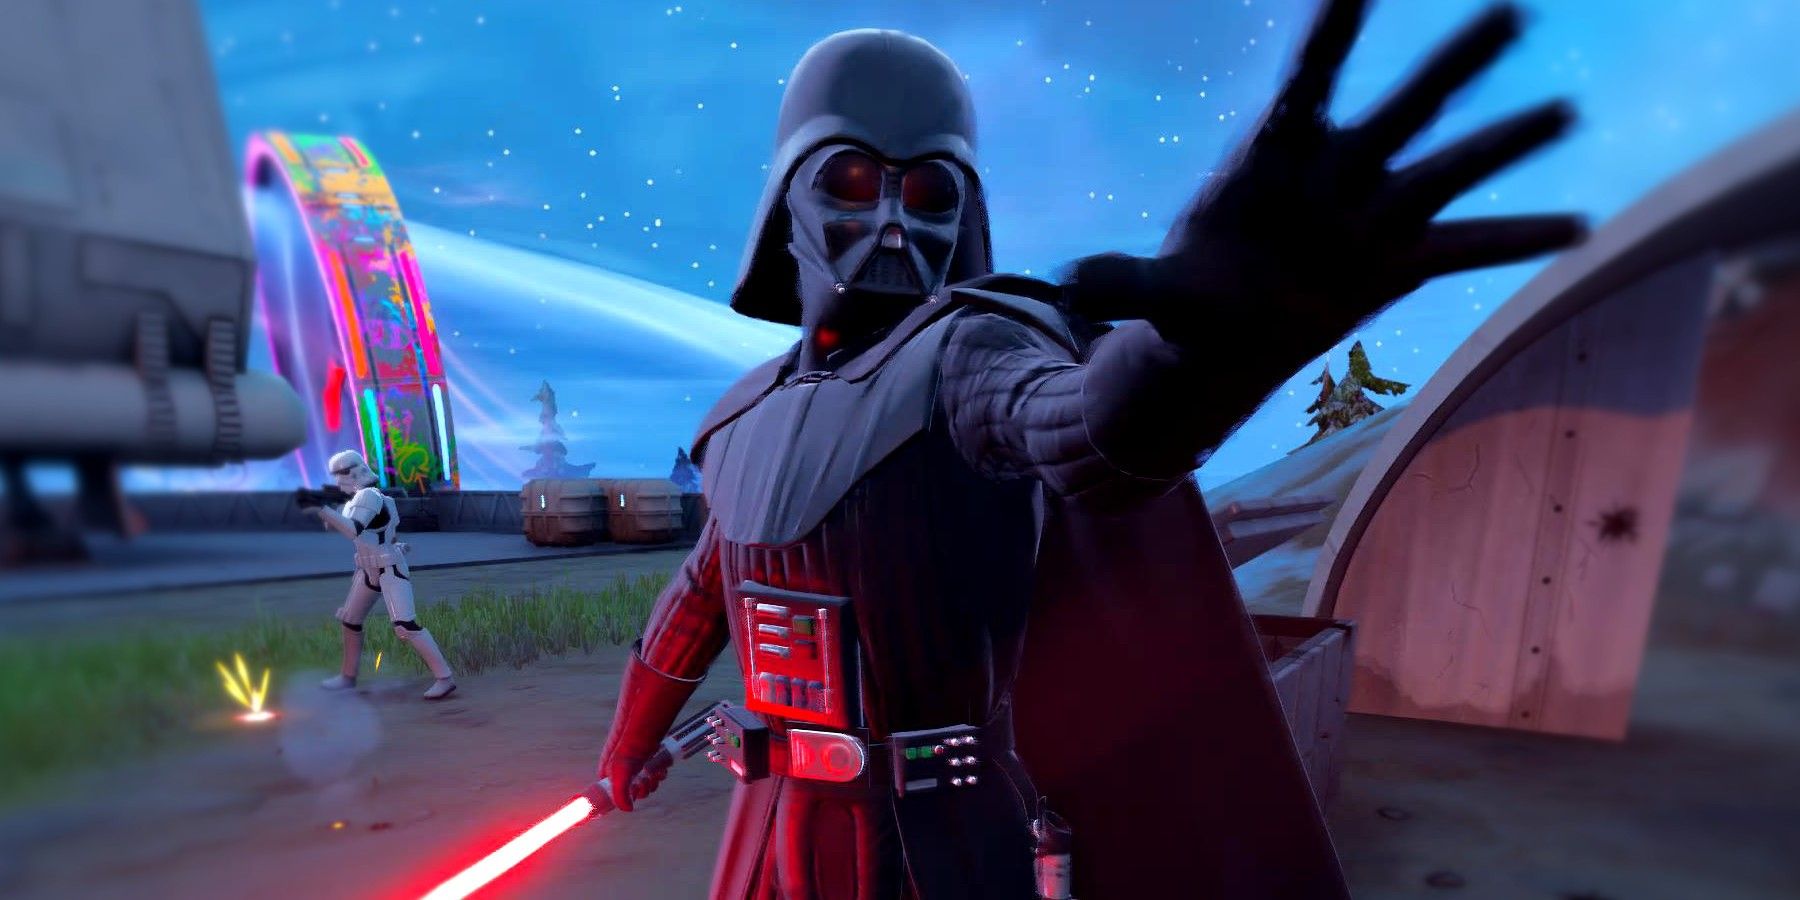 Darth Vader force pulling someone in Fortnite, with a Stormtrooper in the background.